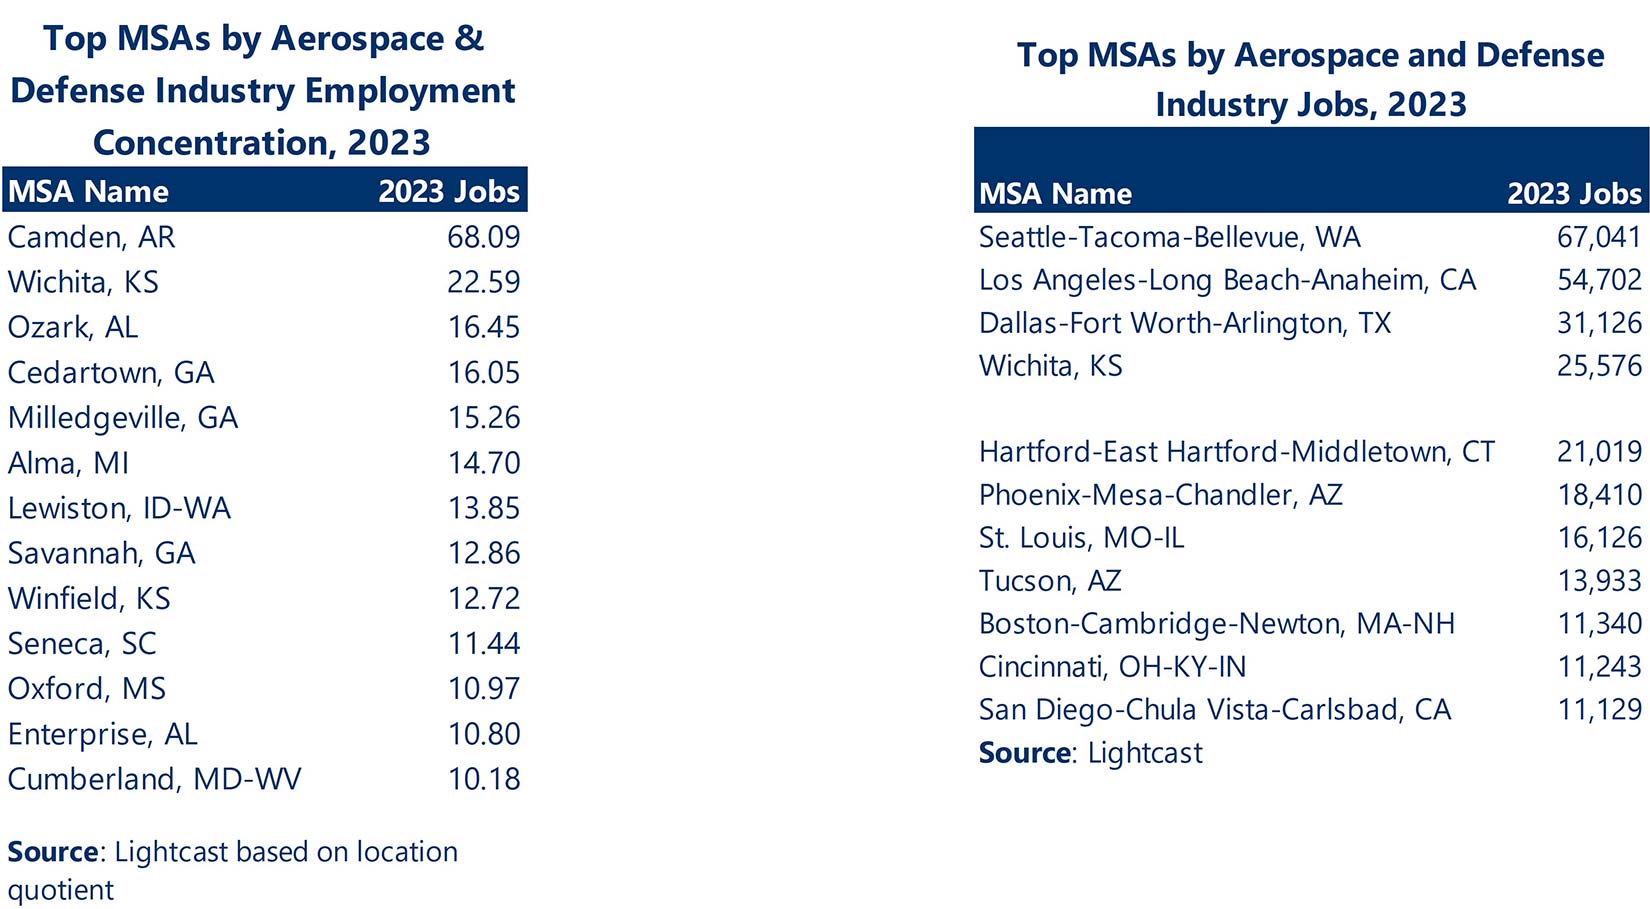 Two charts showing the Top MSAs by Aerospace and Defense industry jobs and employment concentration for 2023